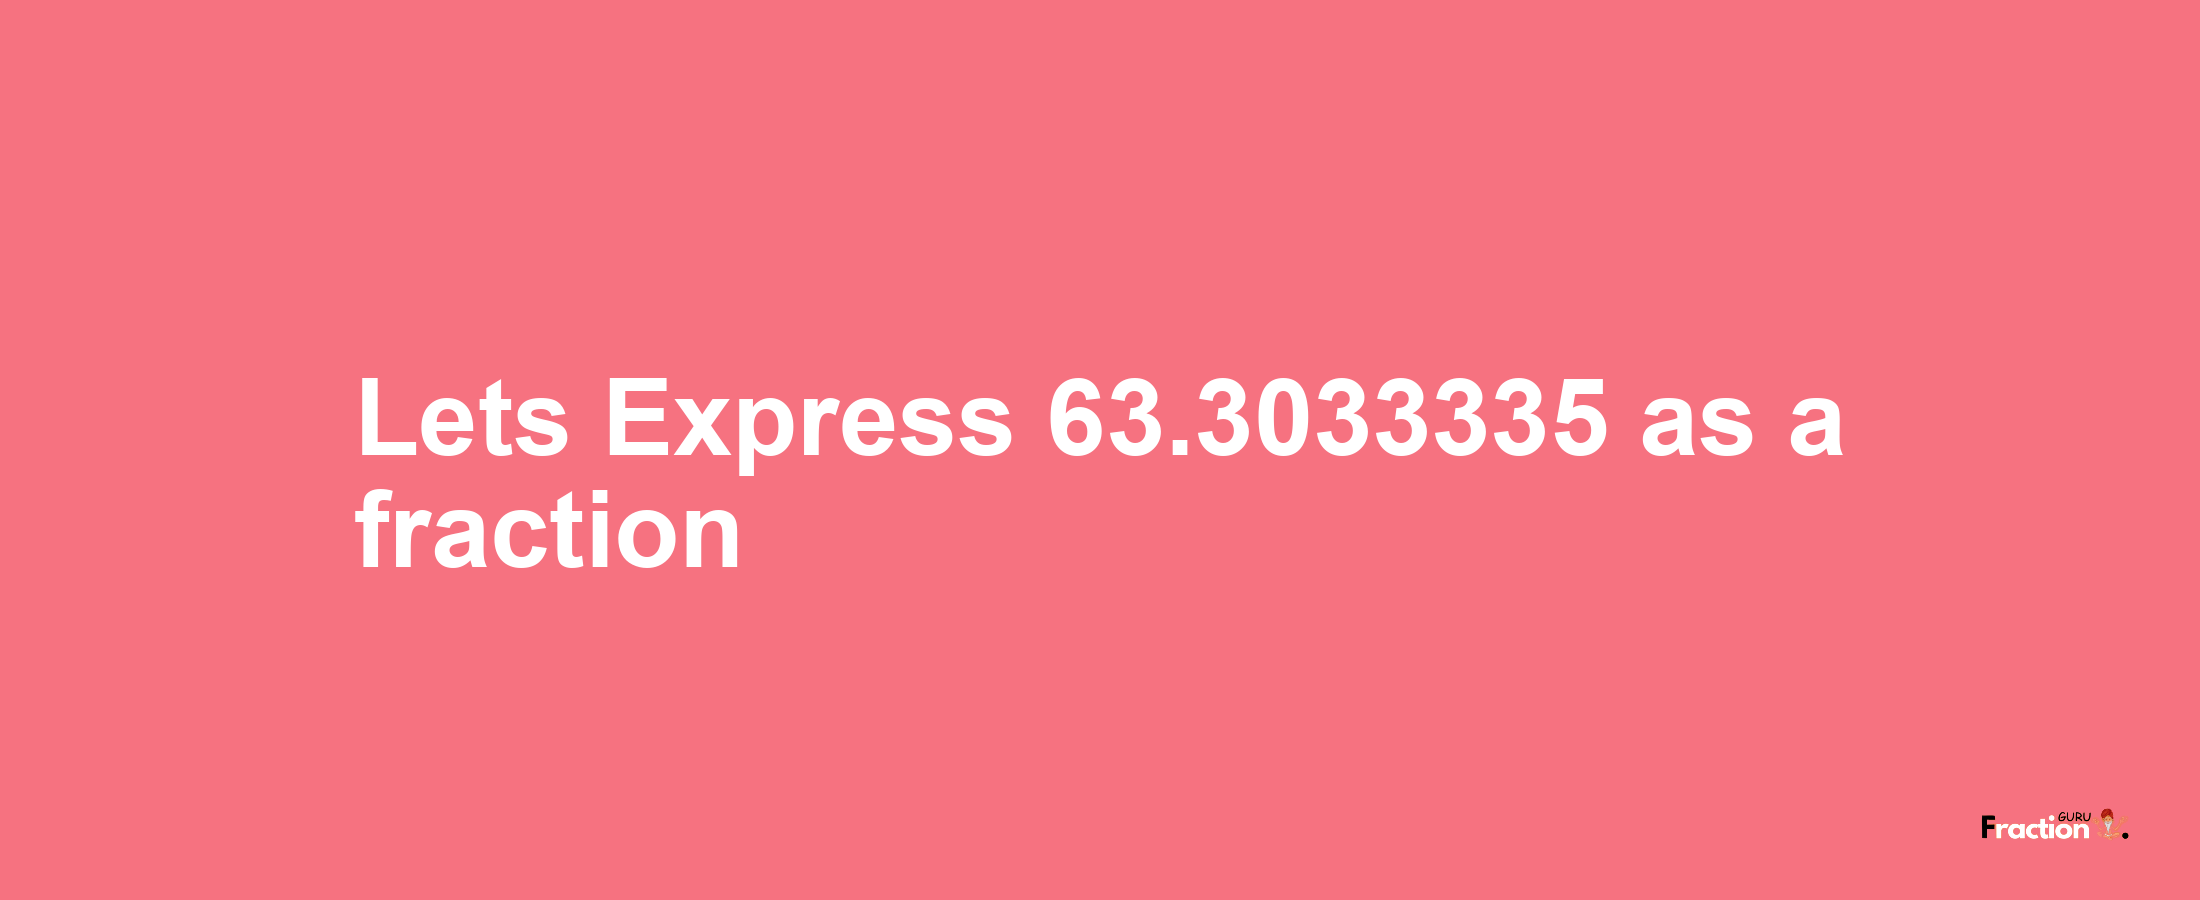 Lets Express 63.3033335 as afraction